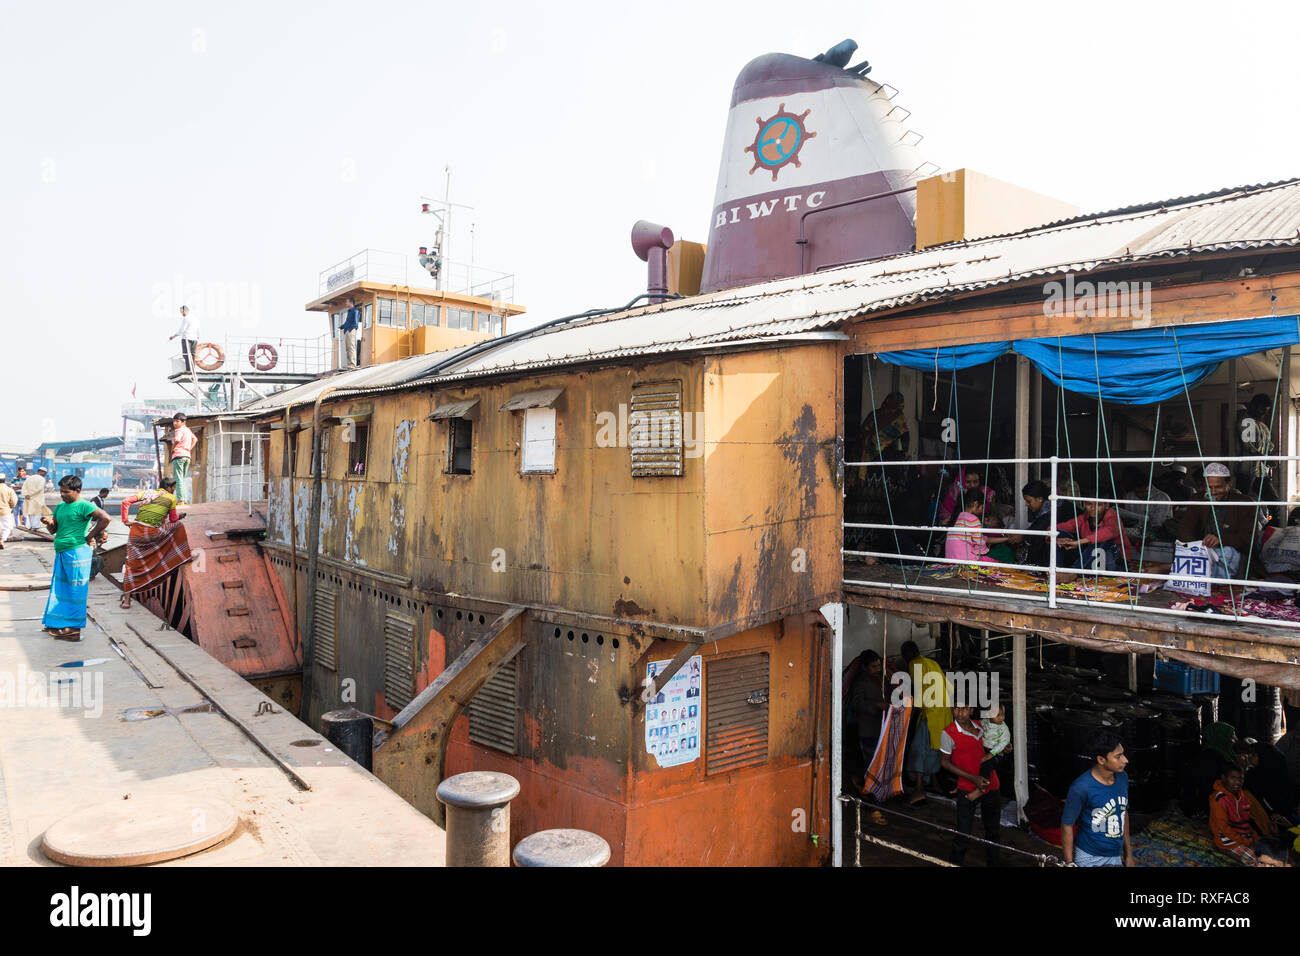 Barisal, Bangladesh, February 27 2017: View of the second and third class of The Rocket - an ancient paddle steamer operating on the rivers of Banglad Stock Photo